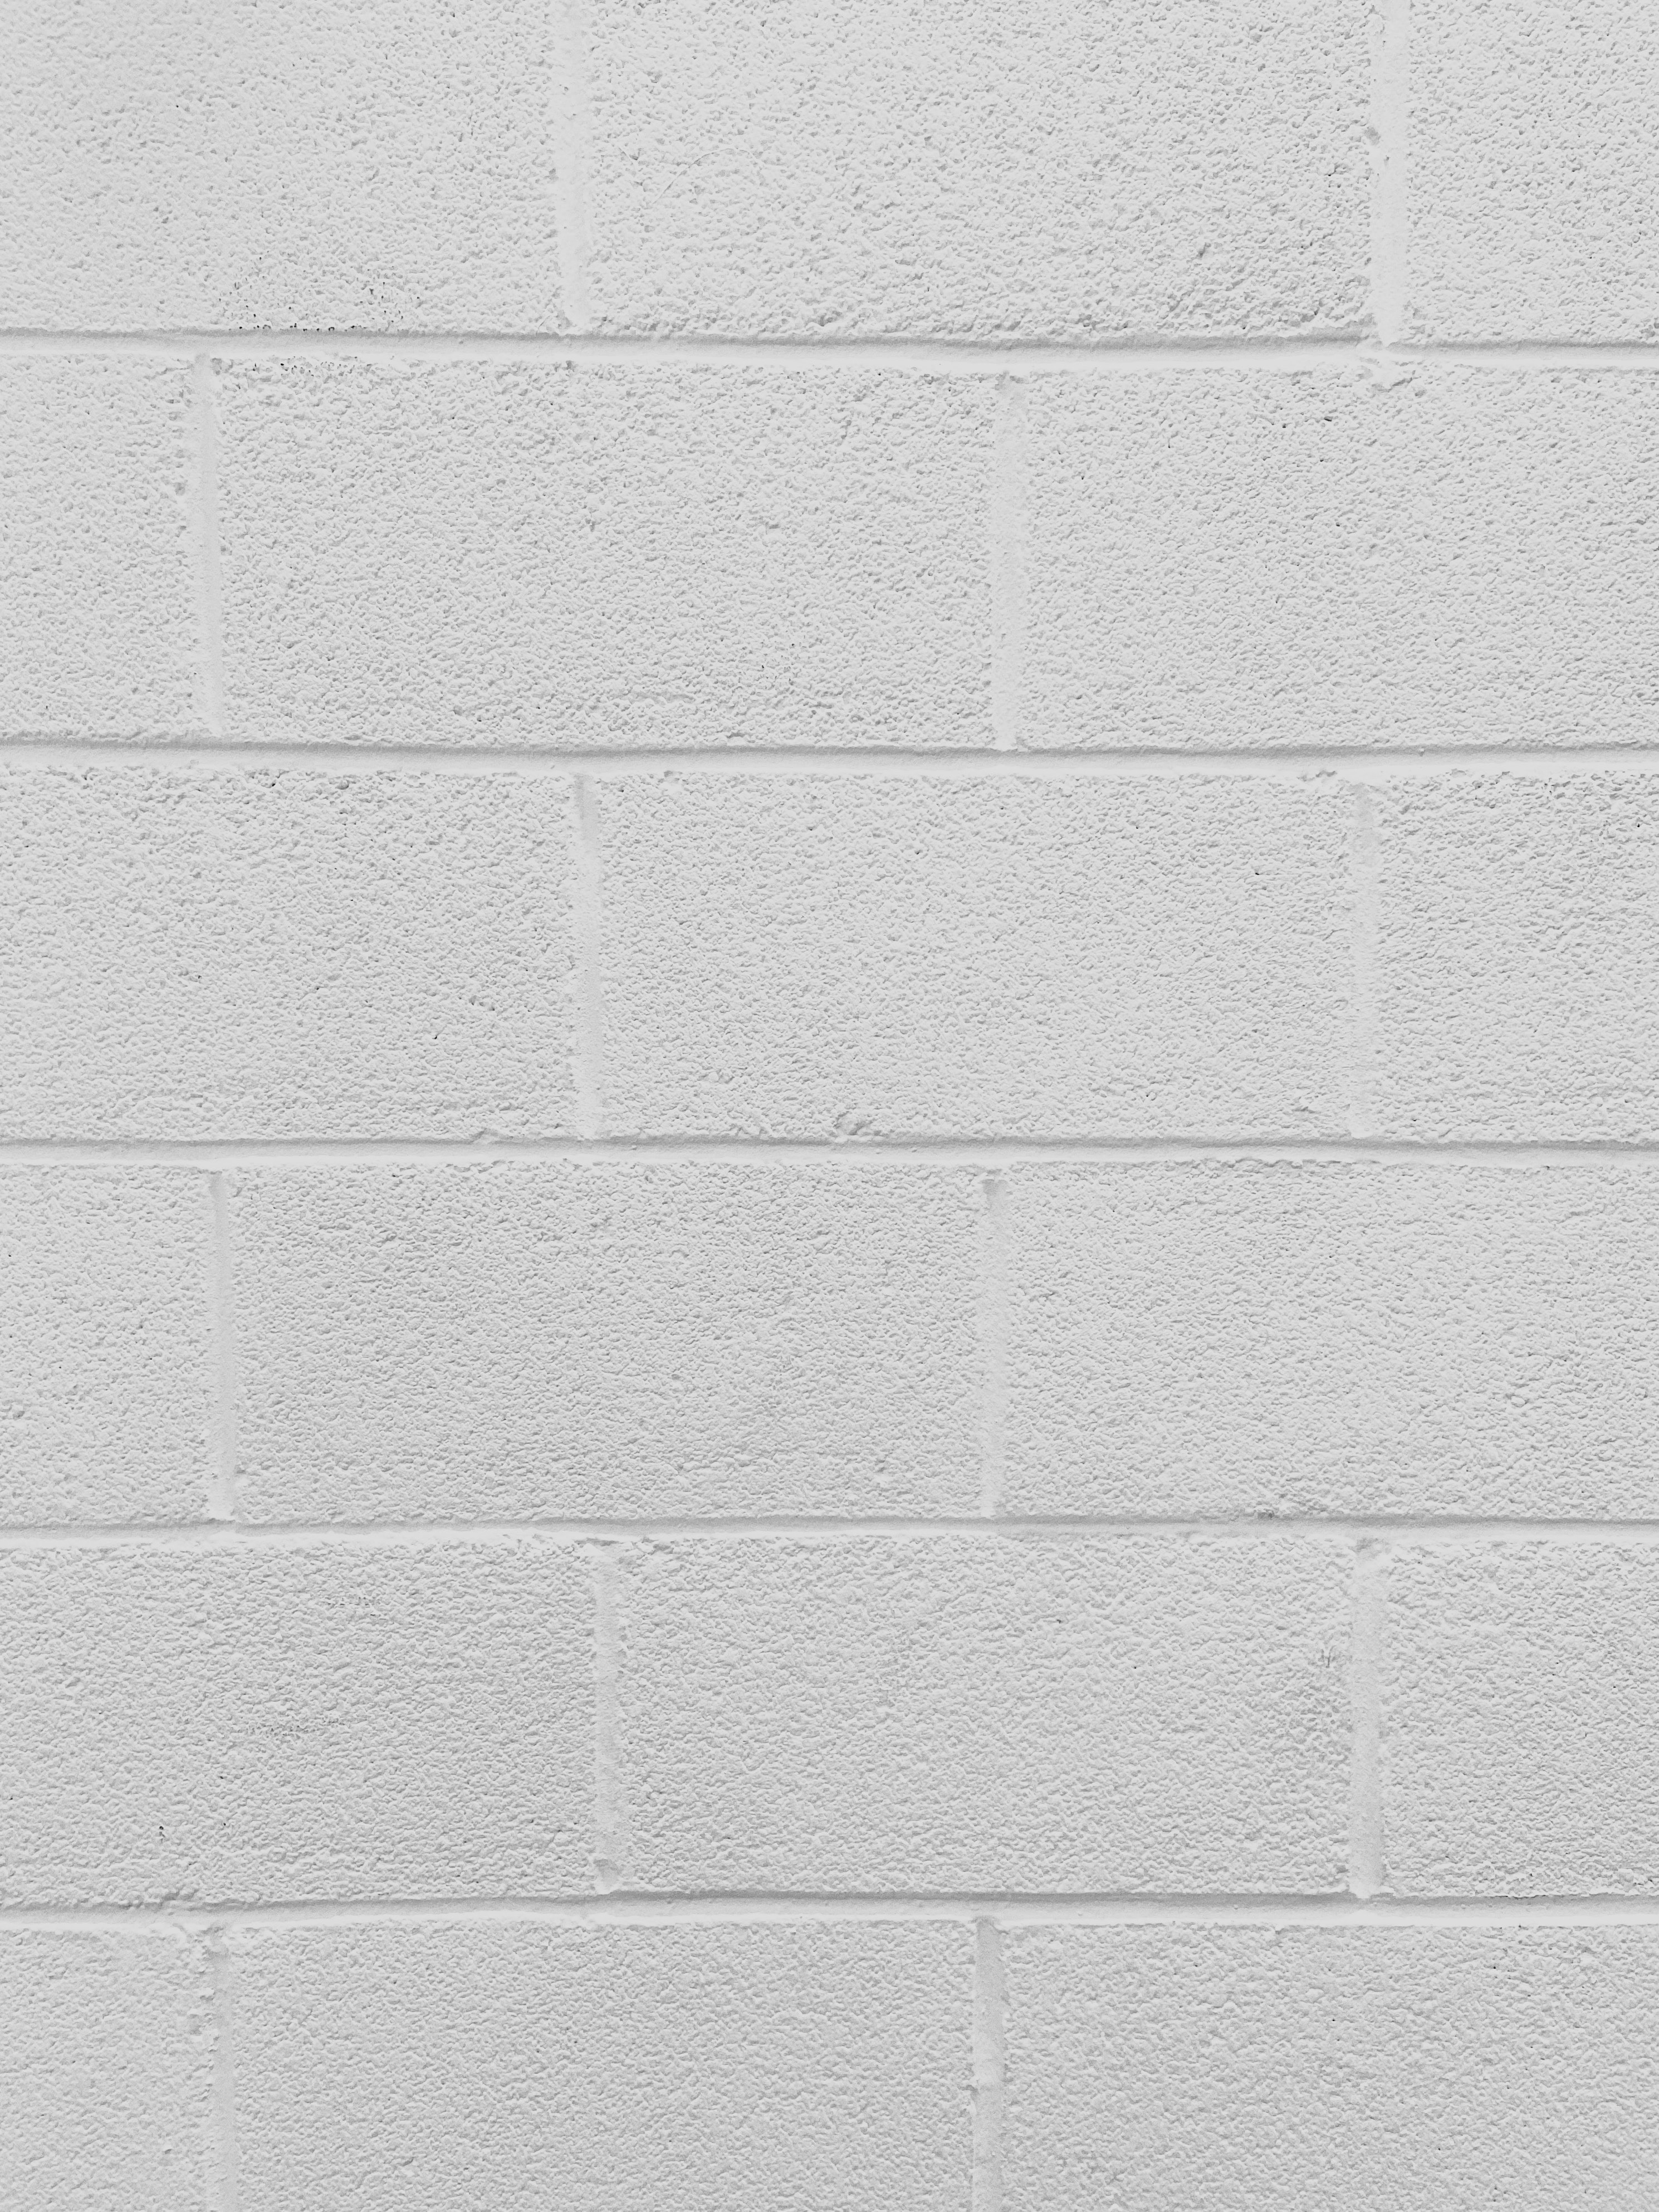 86000 free download White wallpapers for phone, wall, surface, texture, textures White images and screensavers for mobile